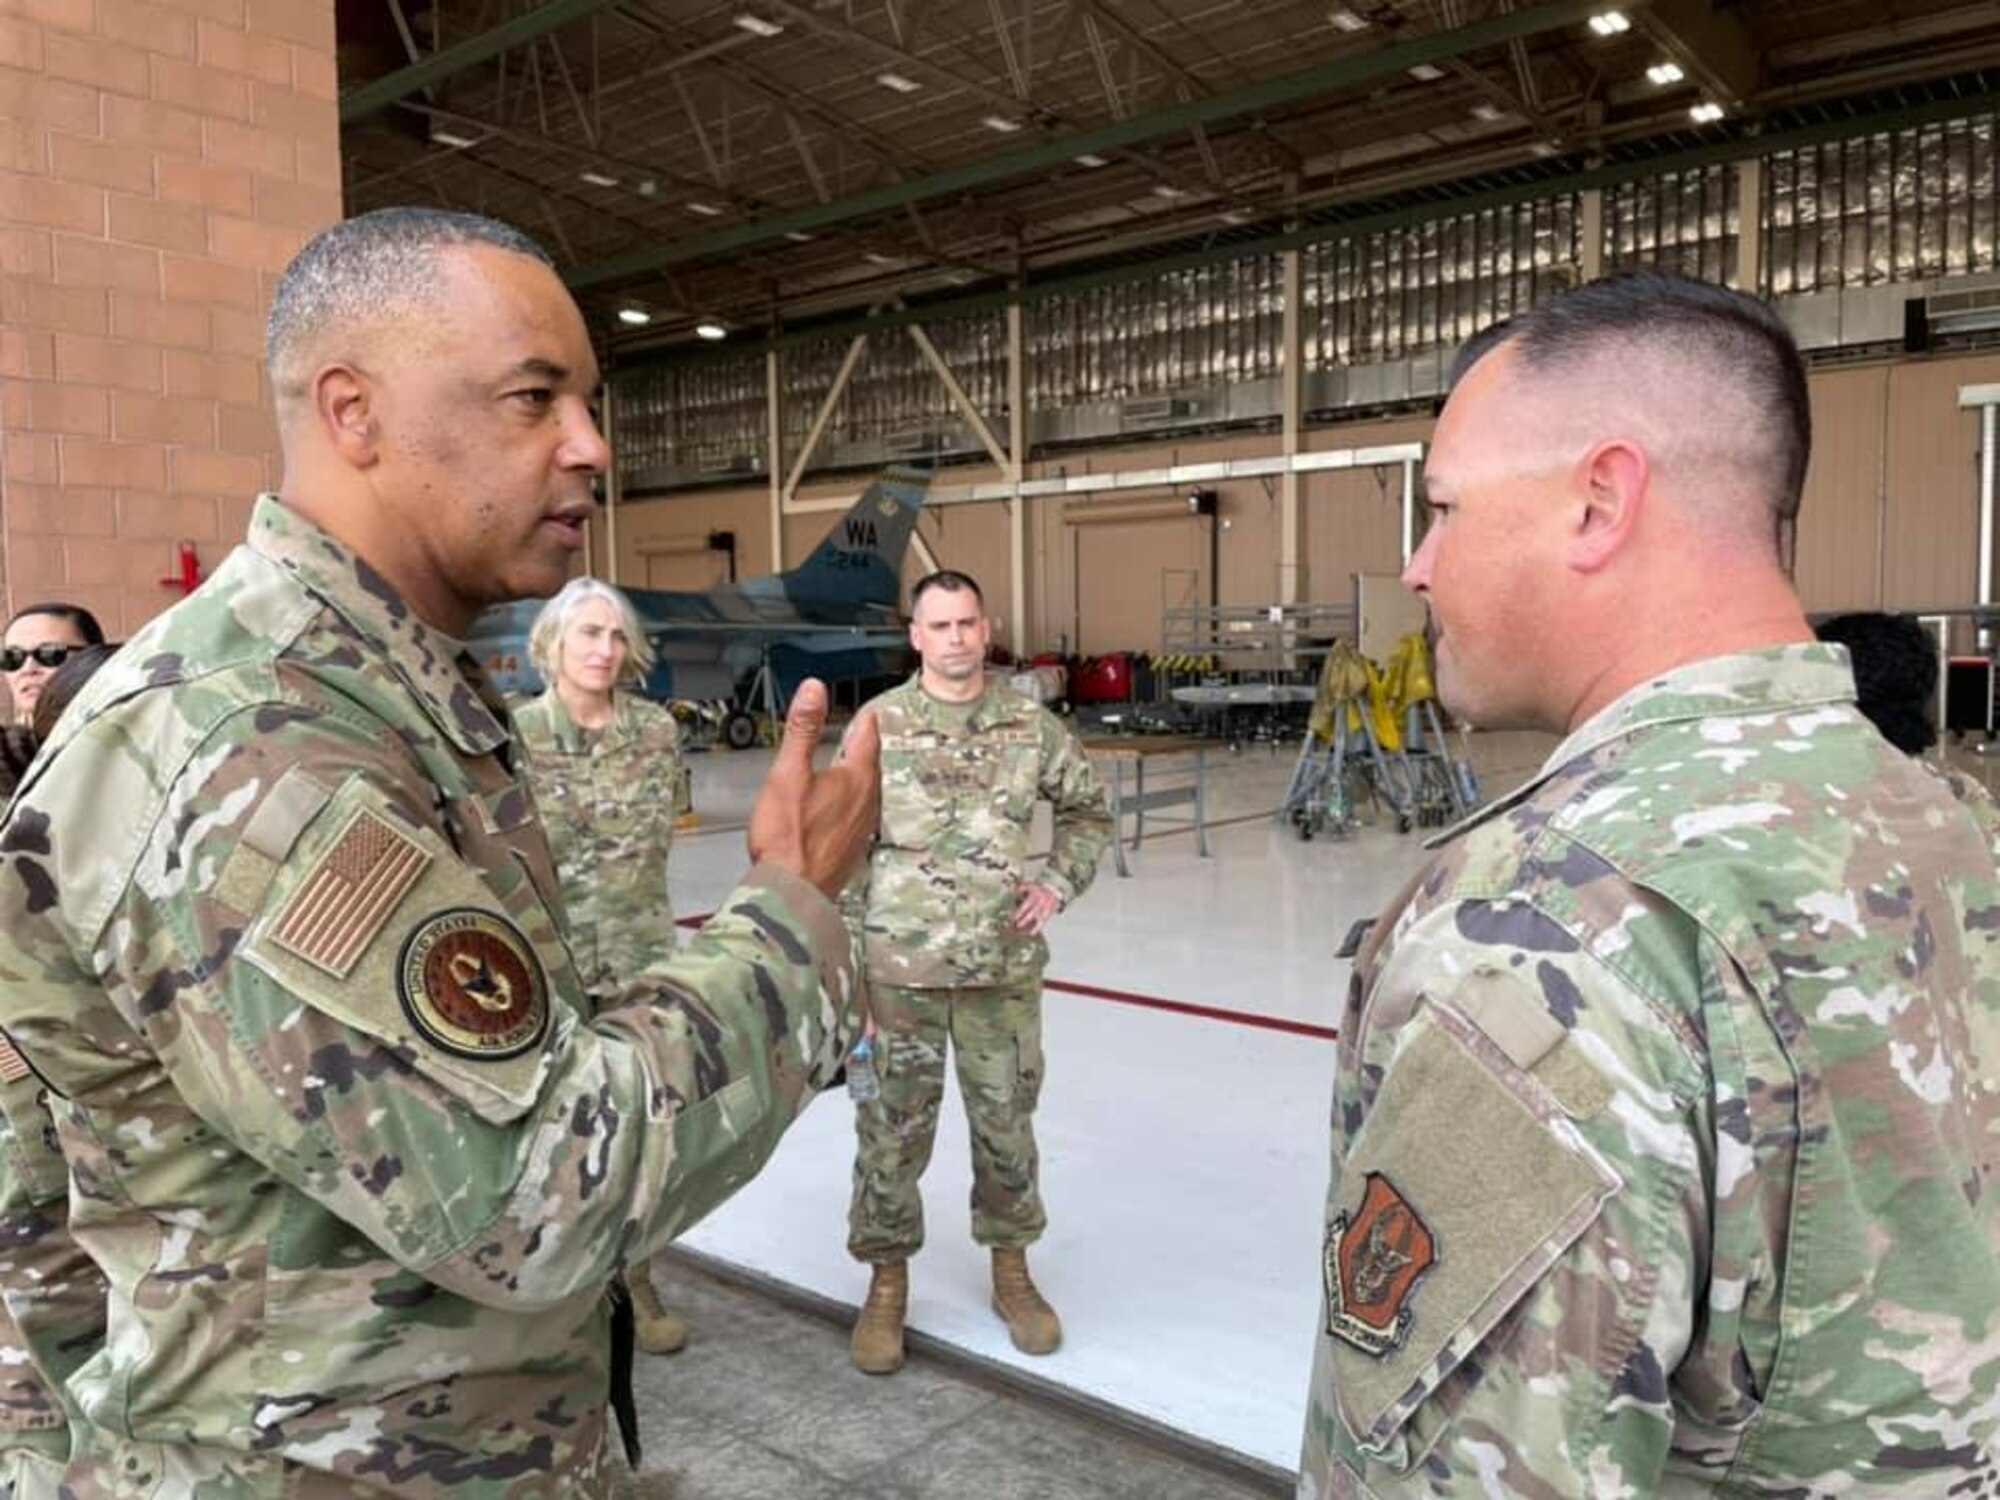 Chief Master Sgt. Timothy White, Senior Enlisted Advisor to the Chief of Air Force Reserve and Command Chief Master Sergeant of Air Force Reserve Command, speaks with Senior Master Sgt. Seth Little ,926th Aircraft Maintenance Squadron, during a visit to the 926th Wing, June 16, at Nellis Air Force Base, Nevada. Little explained the role of the 926th AMXS on Nellis AFB. White is visiting as part of the Reserve Senior Enlisted Council hosted by 10th Air Force. (U.S. Air Force photo by Natalie Stanley)